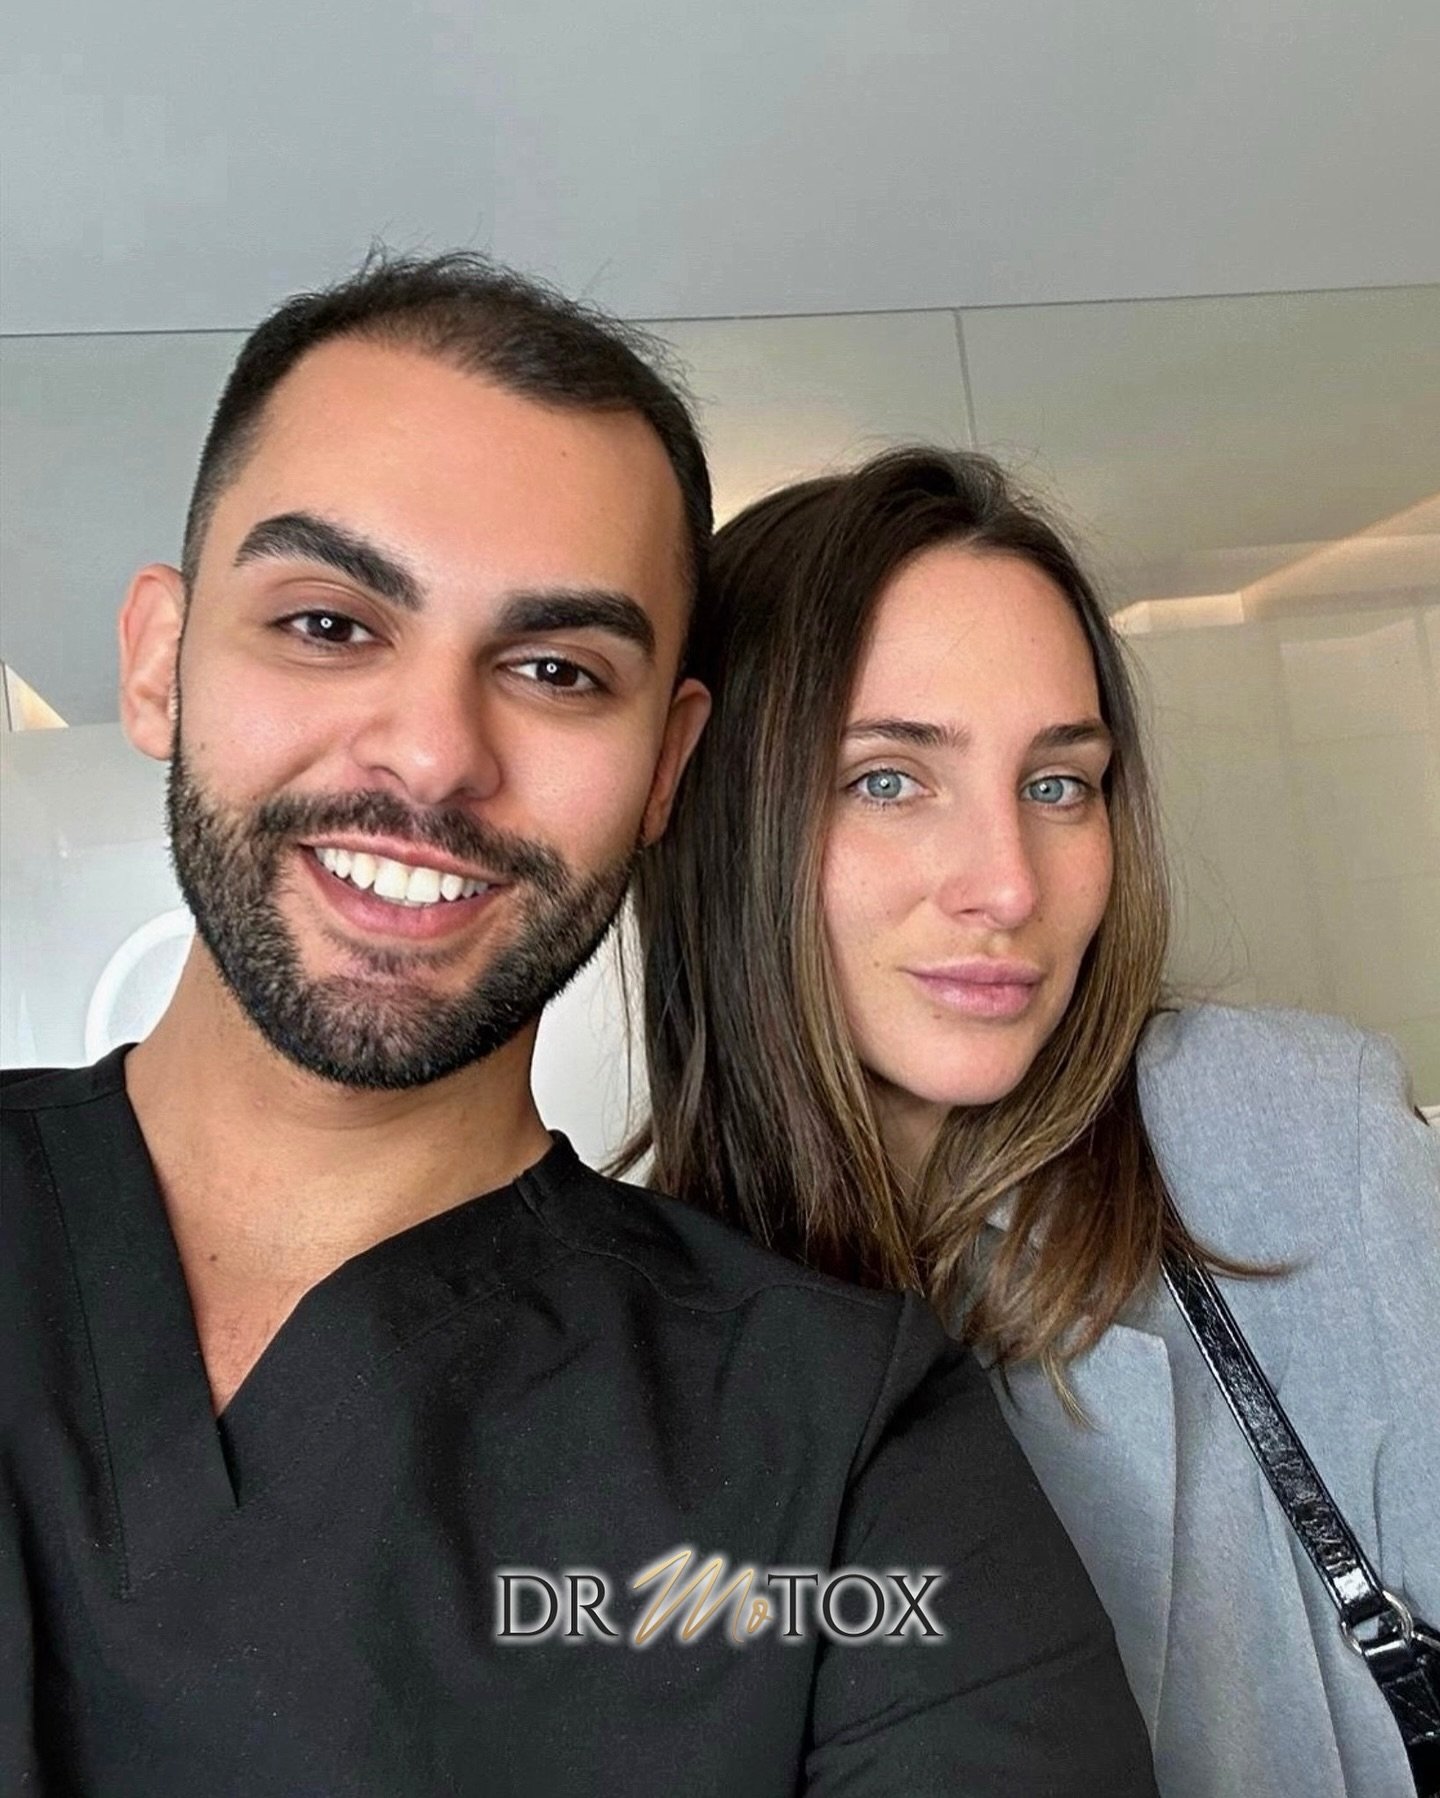 The beautiful @maevadascanio popped into the Clinic to see Dr Mo for a freshen up🫧☺️ ⁣
⁣
We love seeing our clients for their maintenance appointments every few months! 𝐈𝐭&rsquo;𝐬 𝐢𝐦𝐩𝐨𝐫𝐭𝐚𝐧𝐭 𝐭𝐨 𝐛𝐨𝐨𝐤 𝐲𝐨𝐮𝐫 𝐭𝐨𝐩 𝐮𝐩𝐬 𝐢𝐧 𝐚𝐝?